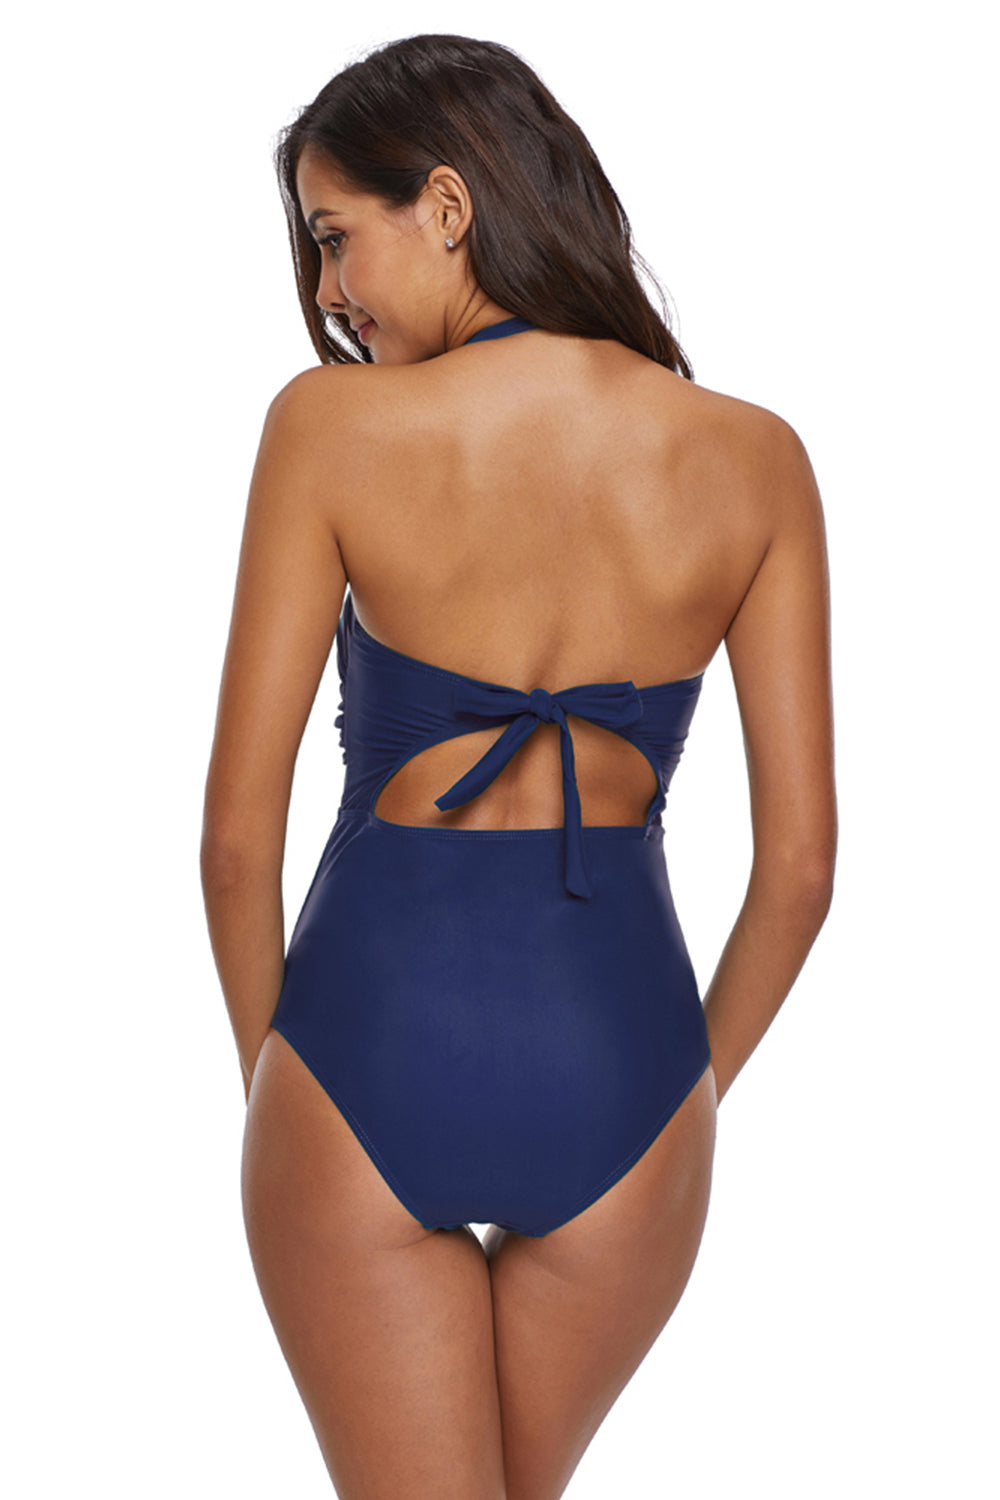 Iyasson Womens Sexy Front Cross Hollow Triangle Halter One-piece Swimsuit